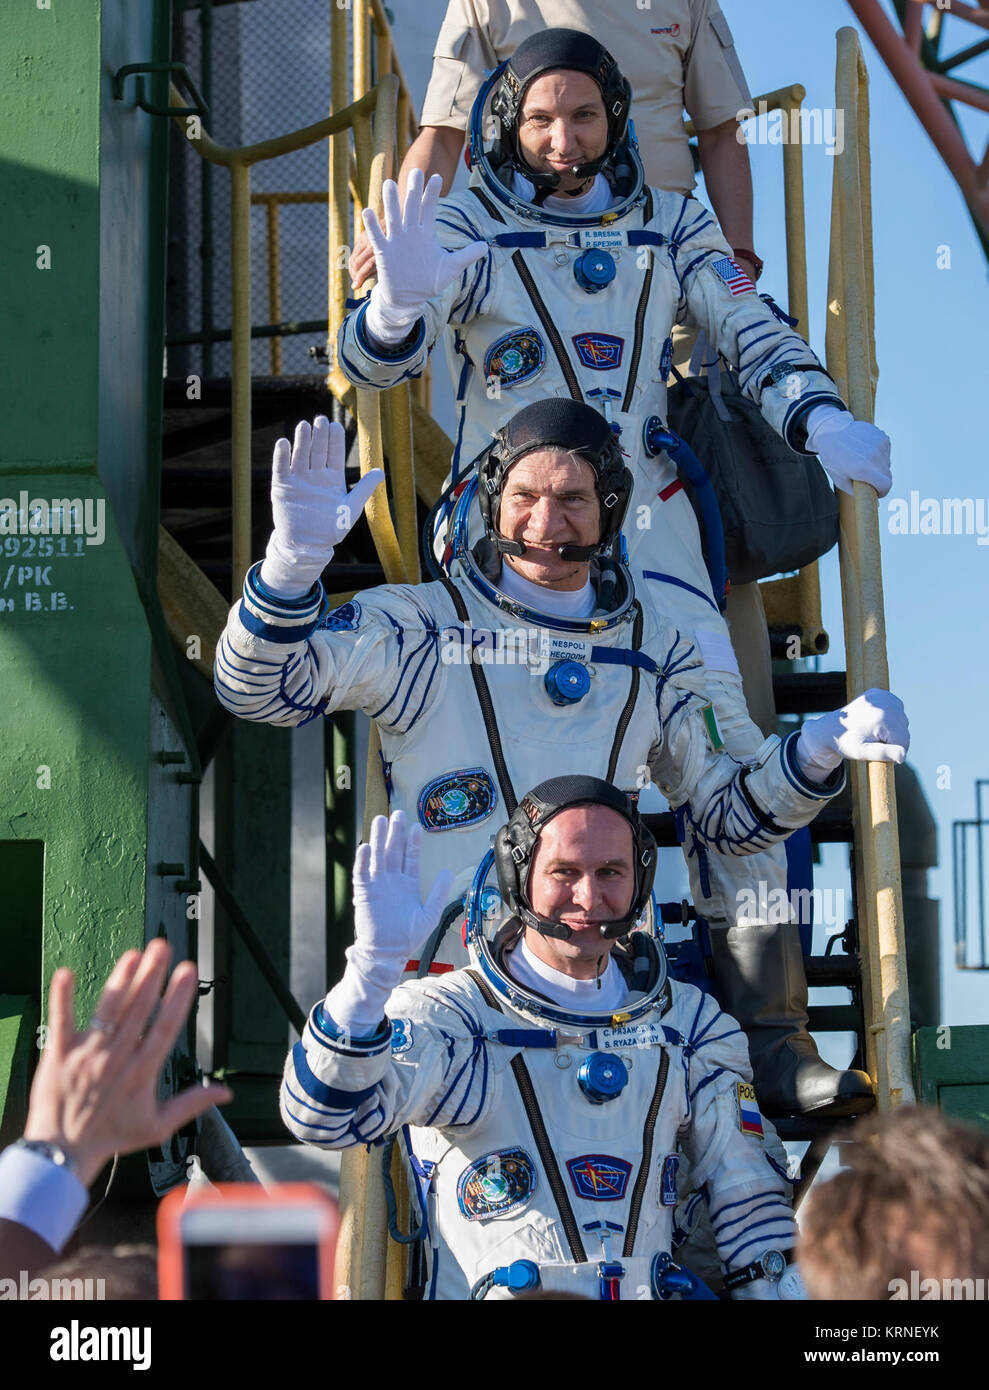 Expedition 52 flight engineer Randy Bresnik of NASA, top, flight engineer Paolo Nespoli of ESA (European Space Agency), middle, and flight engineer Sergei Ryazanskiy of Roscosmos, bottom, wave farewell prior to boarding the Soyuz MS-05 rocket for launch, Friday, July 28, 2017 at the Baikonur Cosmodrome in Kazakhstan.  Ryazanskiy, Bresnik, and Nespoli will spend the next four and a half months living and working aboard the International Space Station.  Photo Credit: (NASA/Joel Kowsky) Expedition 52 Preflight (NHQ201707280004) Stock Photo